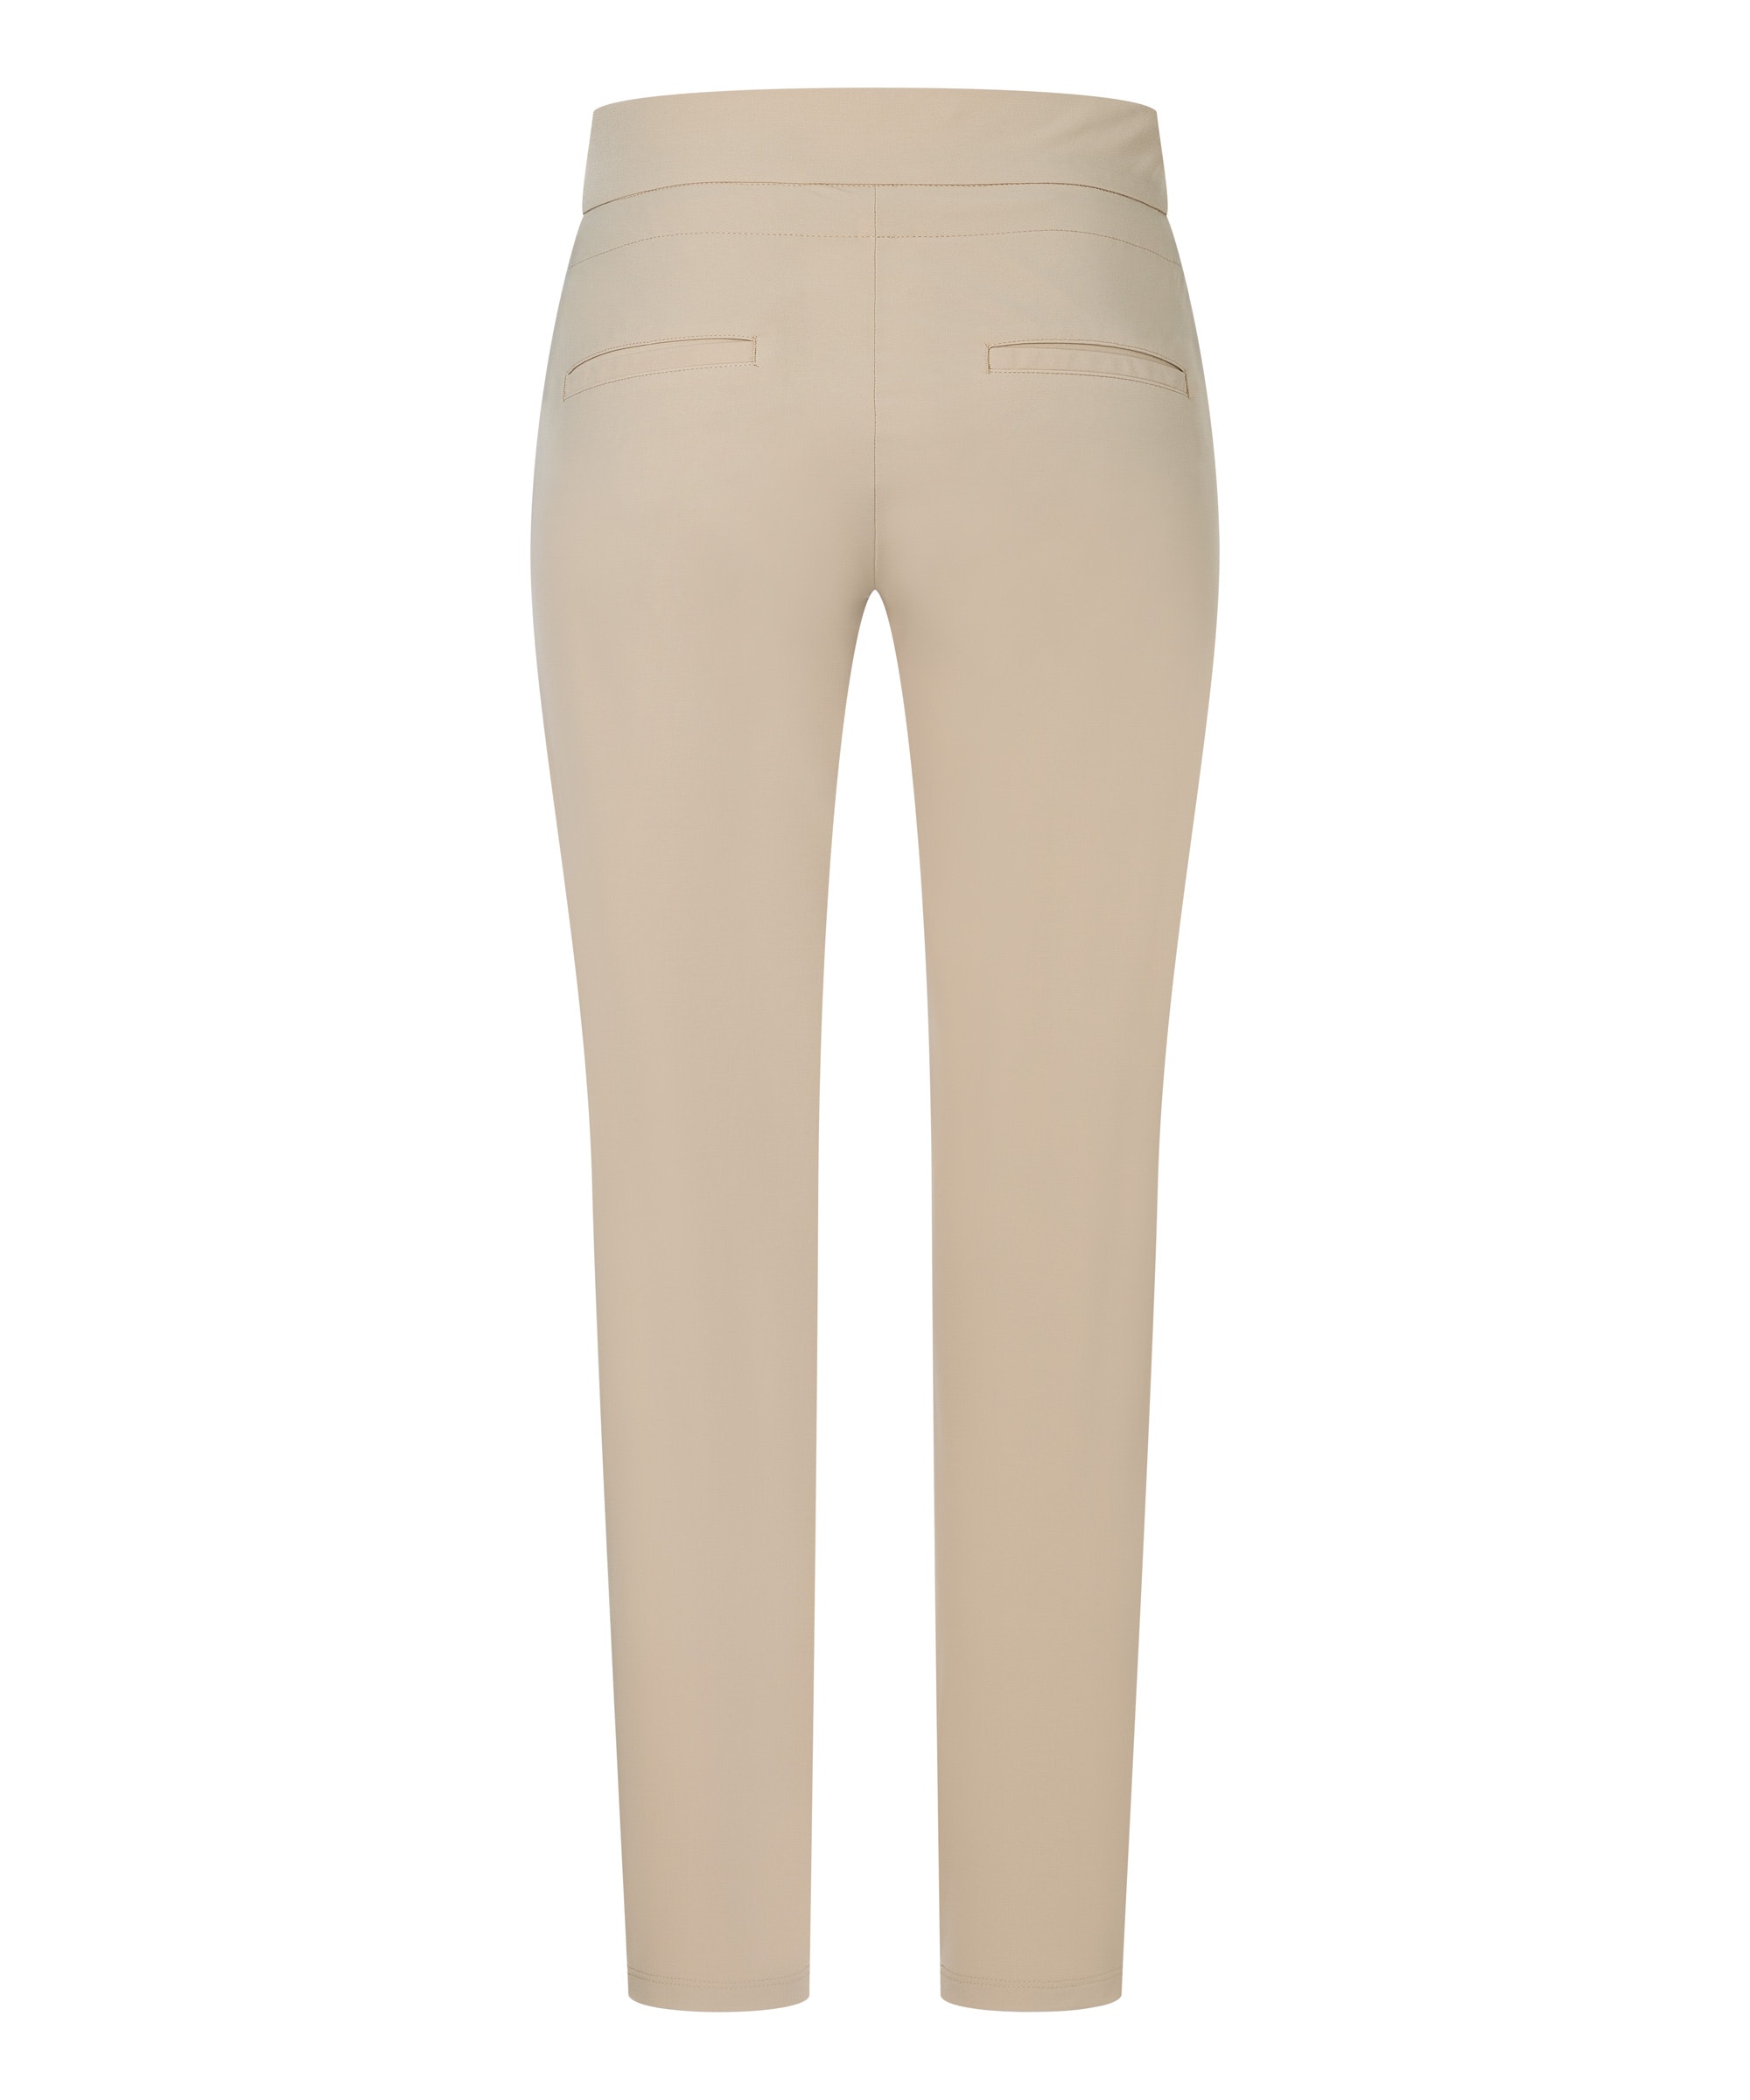 Cambio textile pants Jessy MOONLIGHT TAUPE